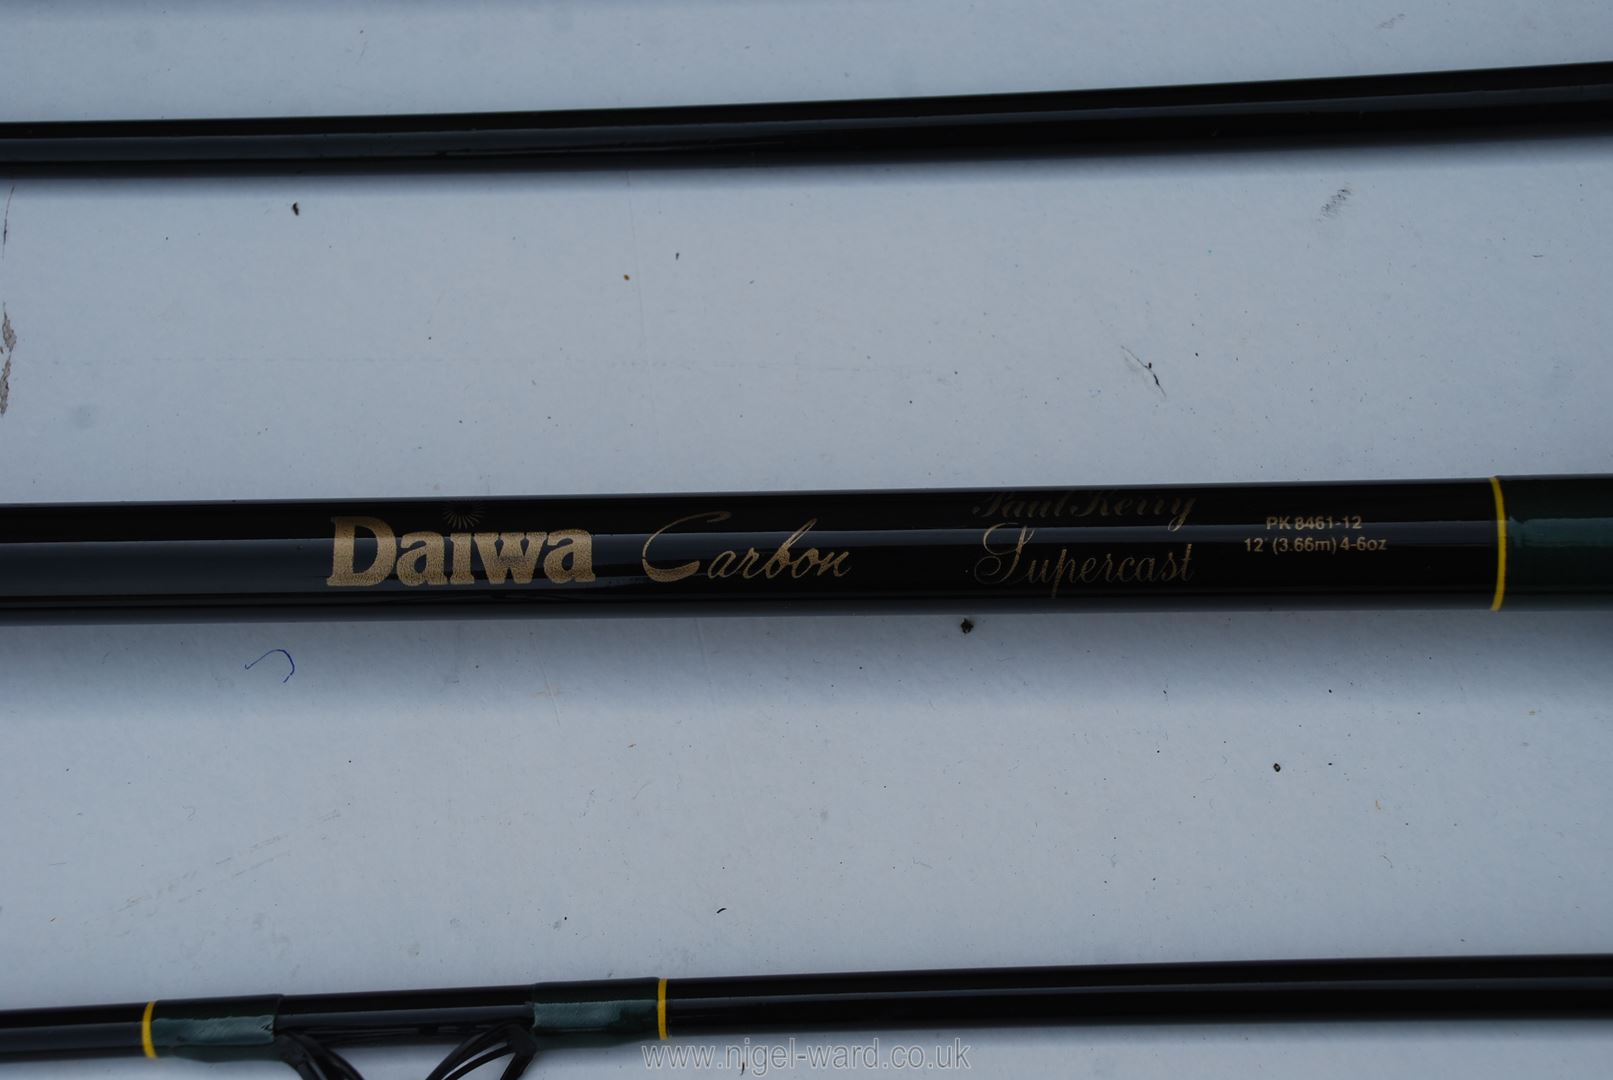 Two Daiwa Paul Kerry Supercast beach rods, one marked 'T. Downey', both 12', one in canvas sleeve. - Image 2 of 3